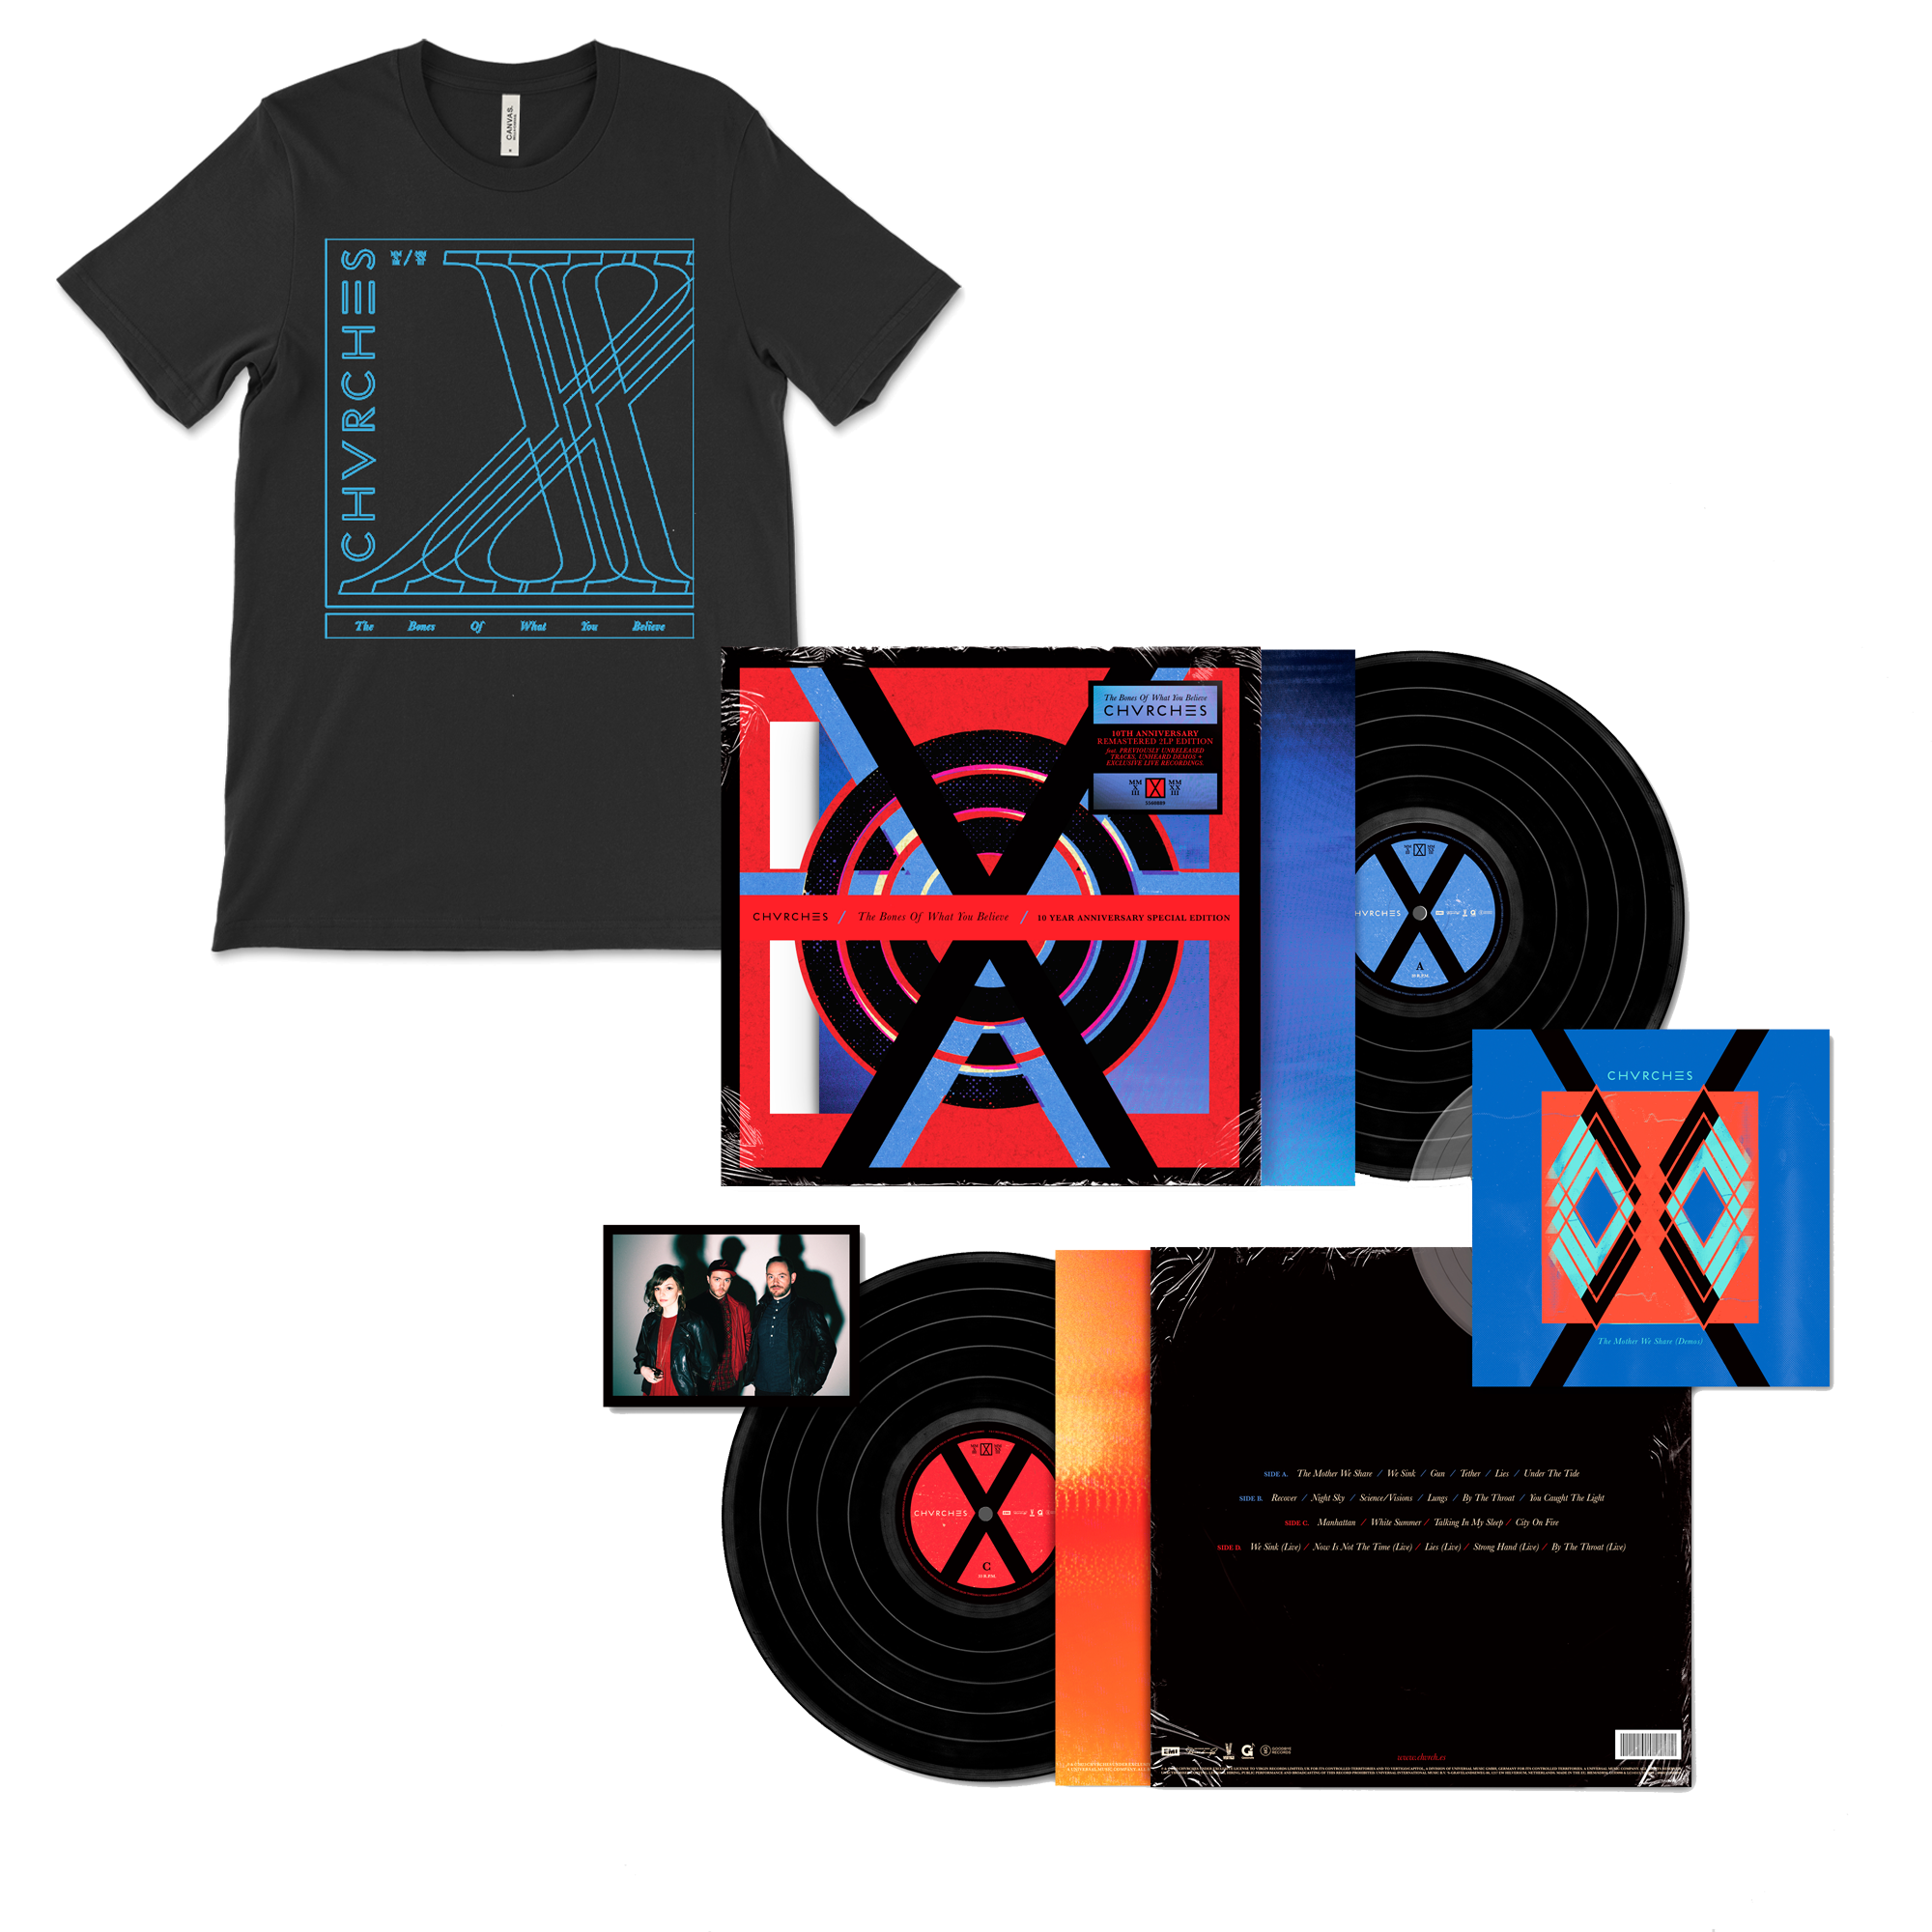 The Bones Of What You Believe (10th Anniversary Edition) 2LP + 7", Signed Art Card & T-Shirt